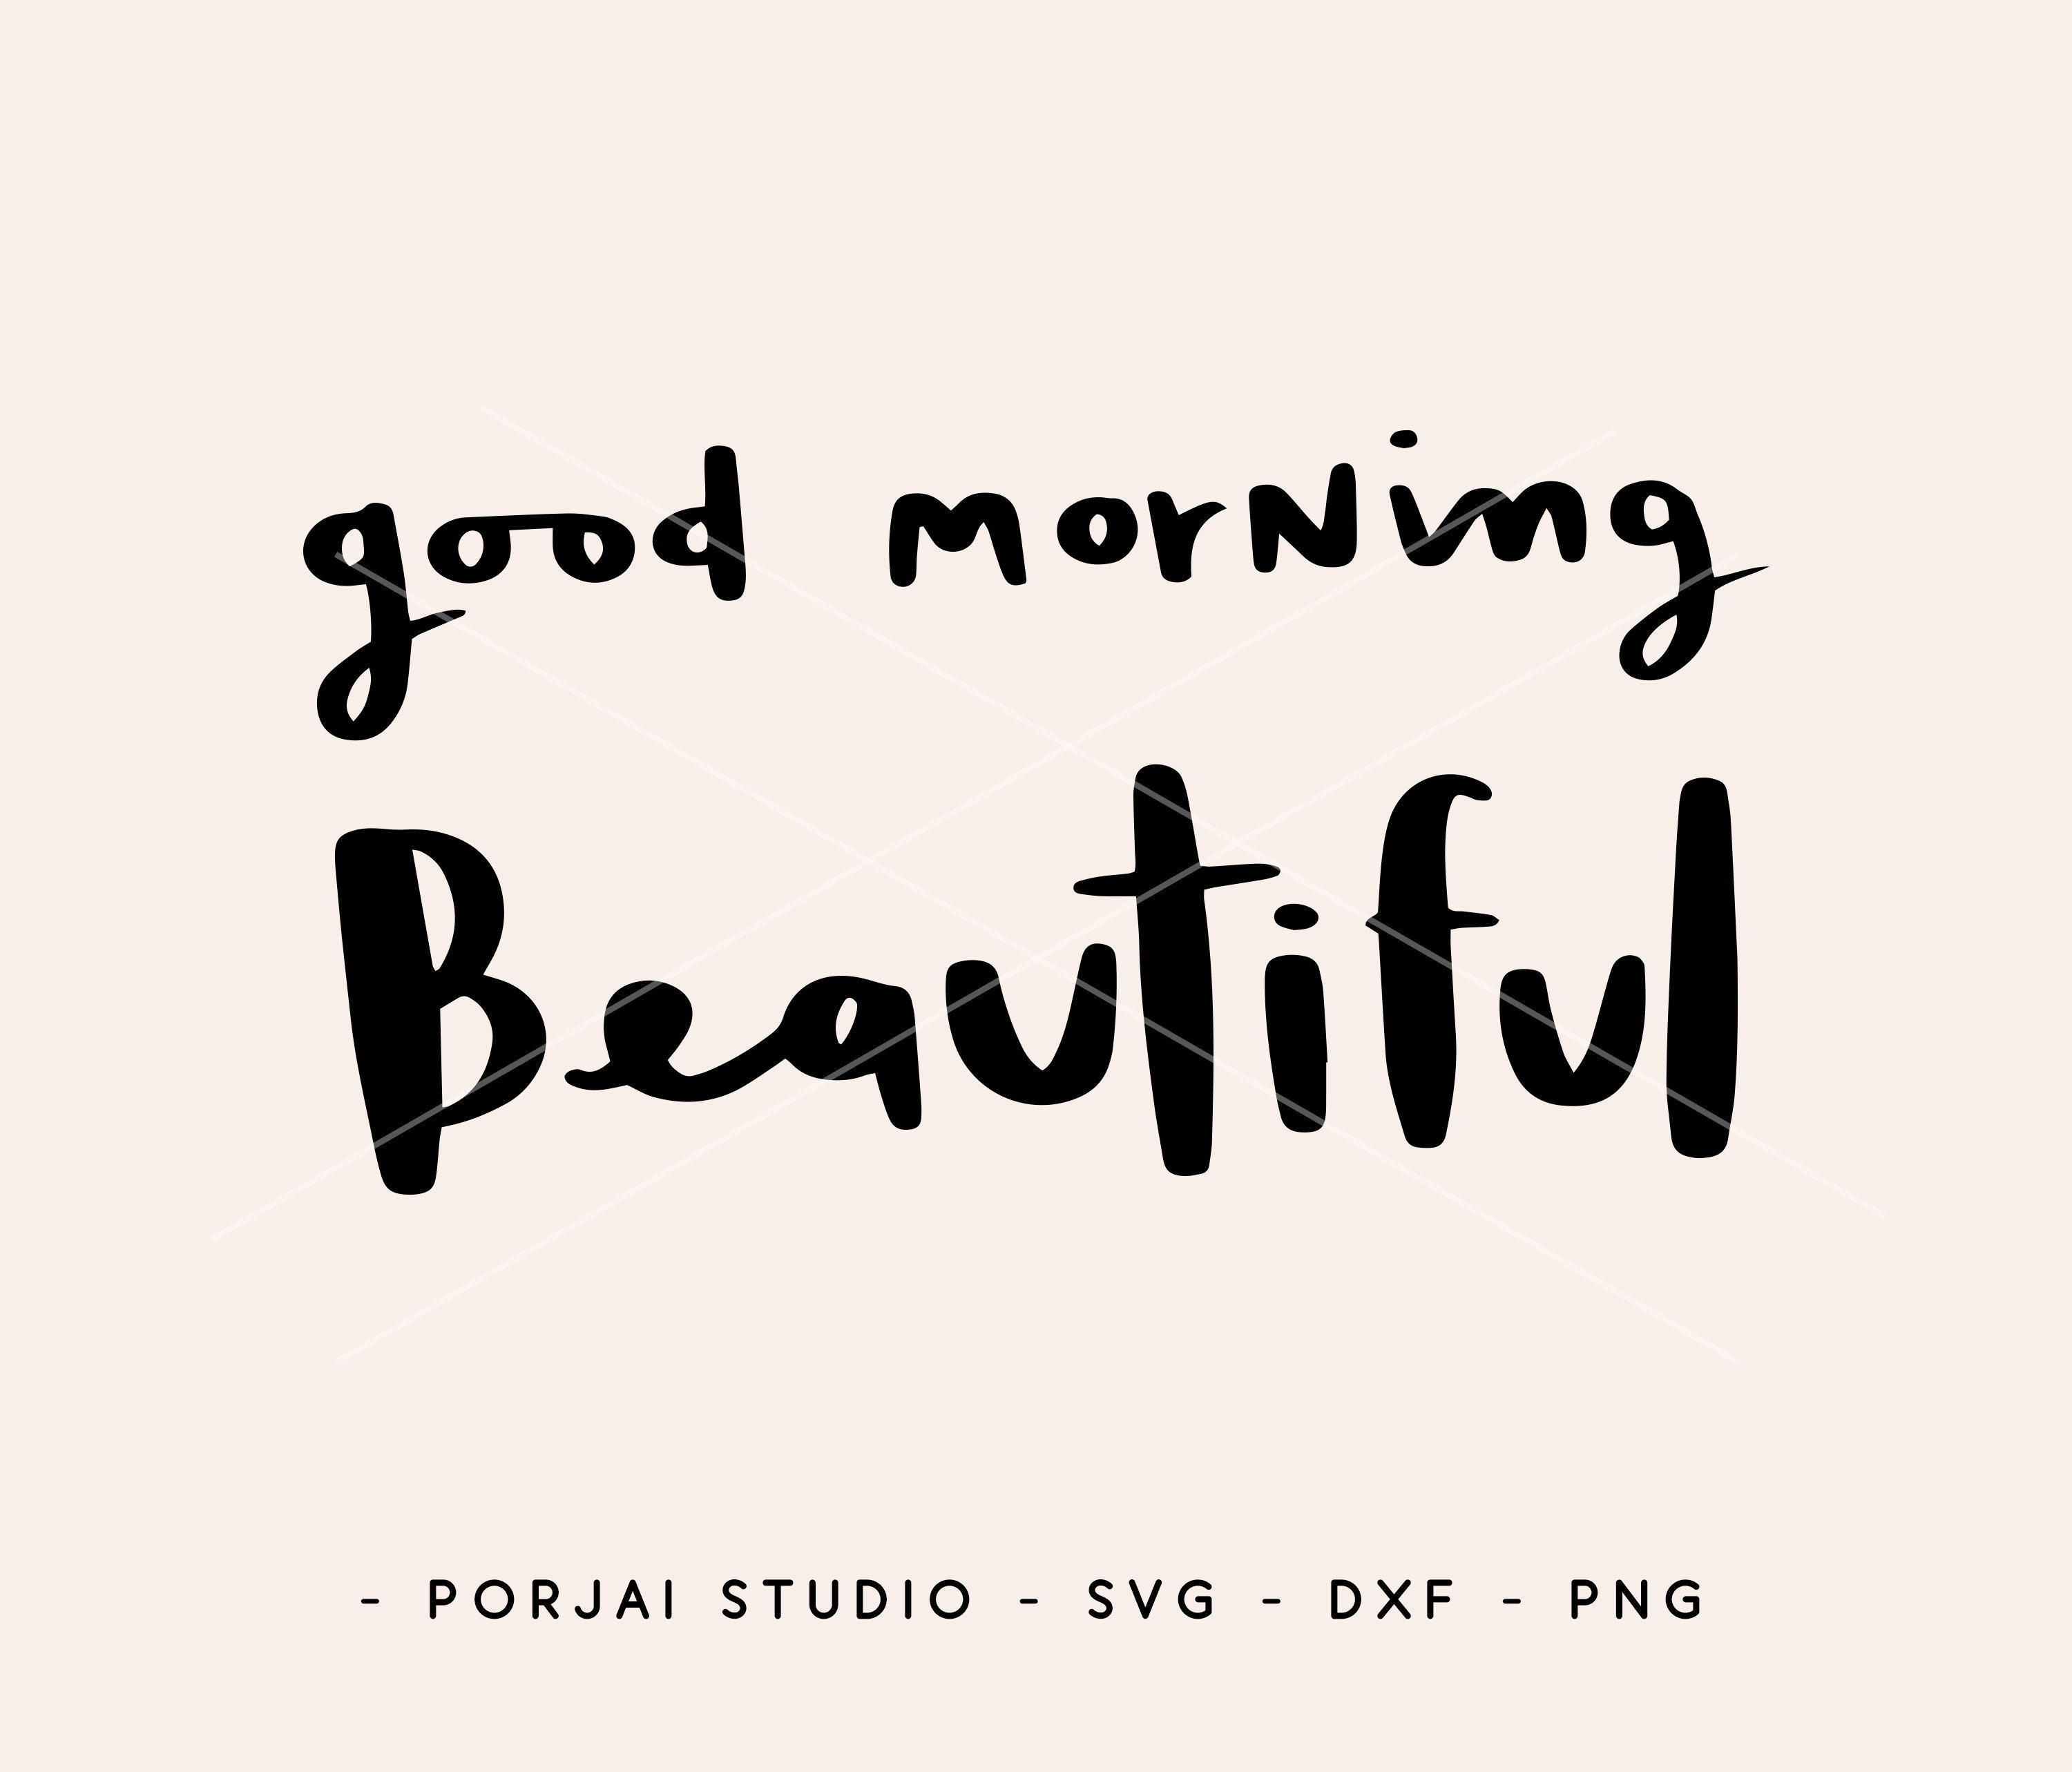 Good Morning Beautiful Svg. Beautiful Svg. Quote Svg. | Etsy